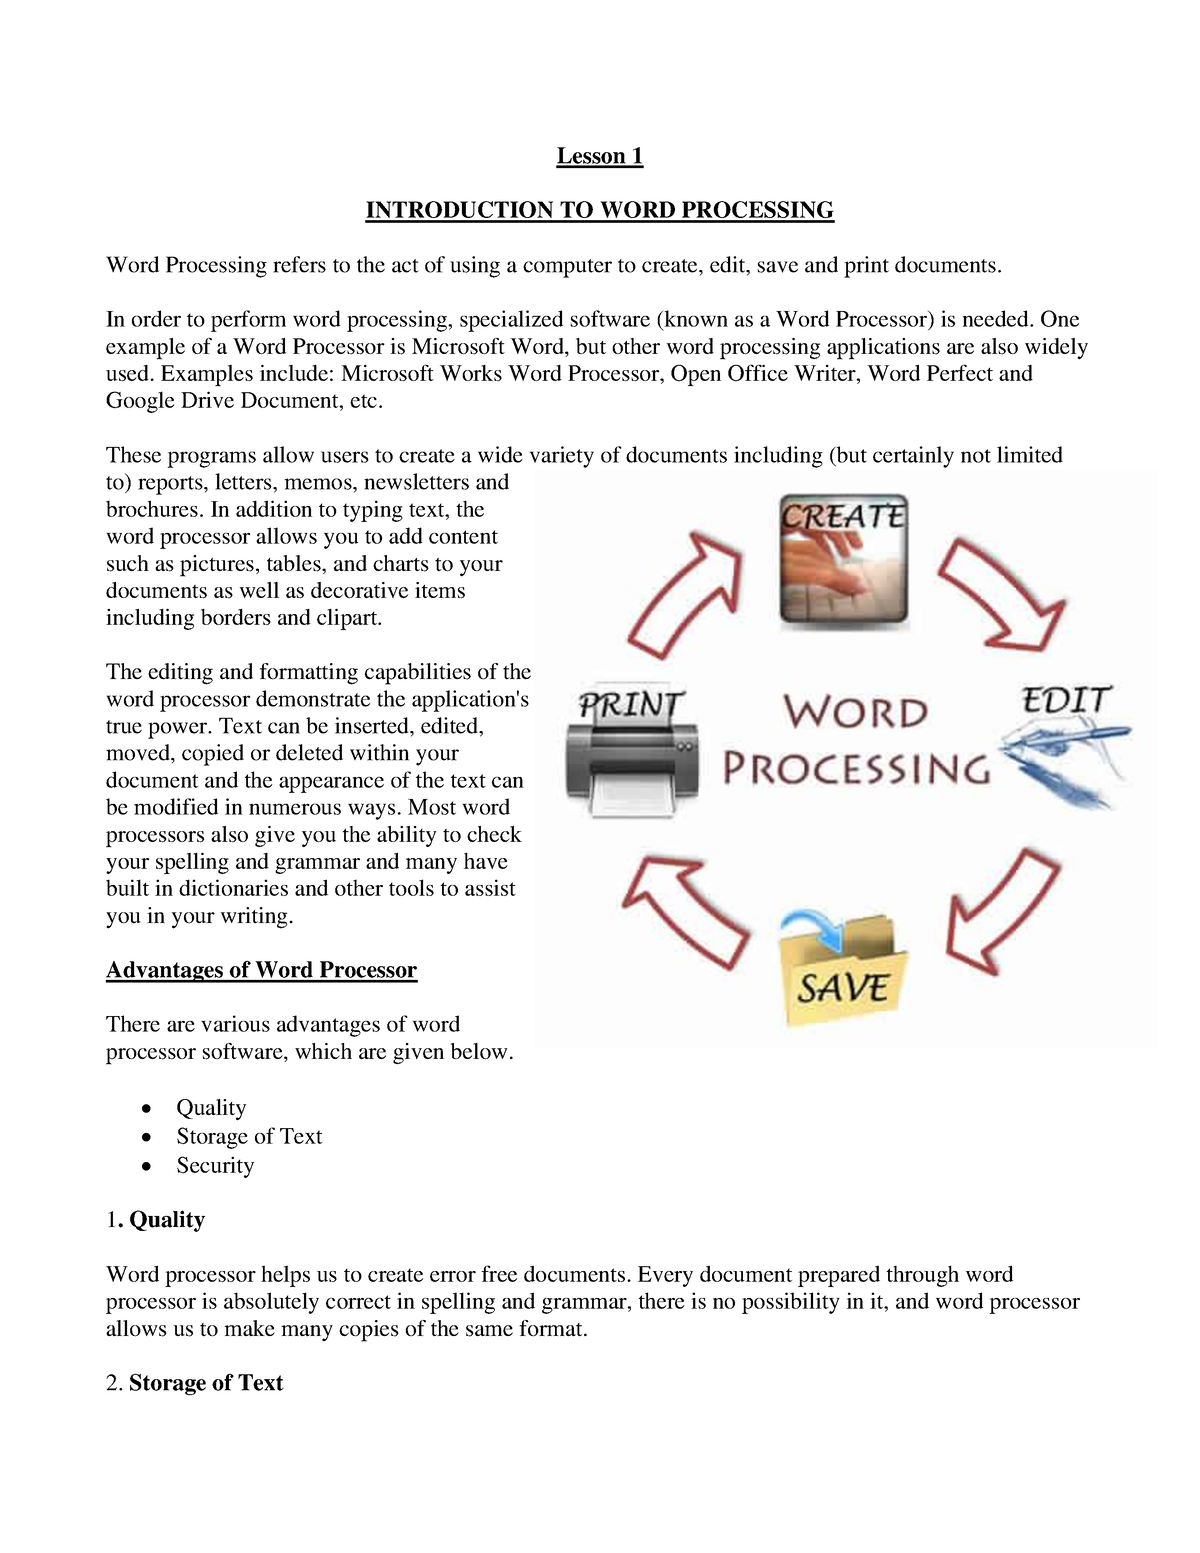 word-processing-notes-2023-120313-lesson-1-introduction-to-word